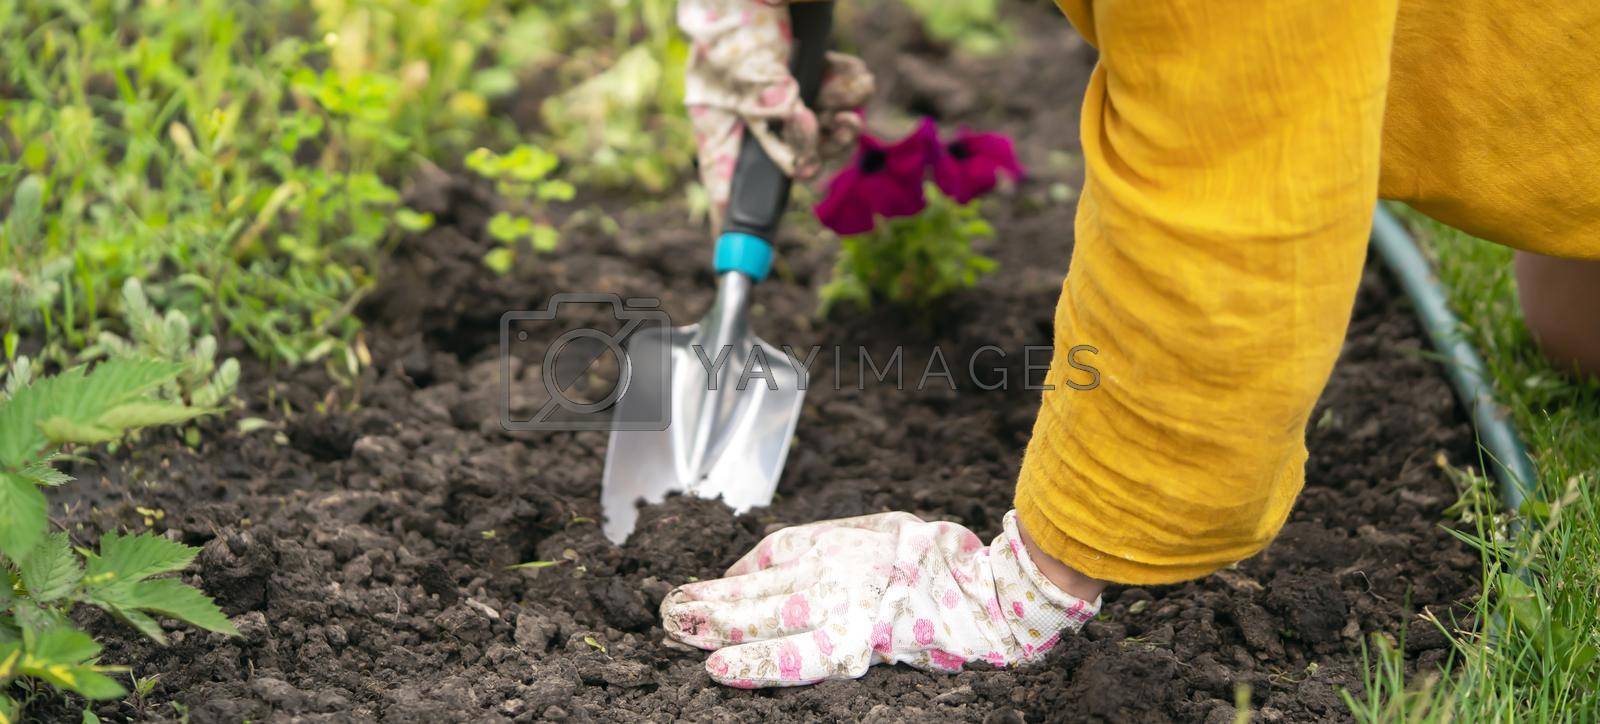 Royalty free image of Closeup of hands of a gardener with a seedling. by africapink